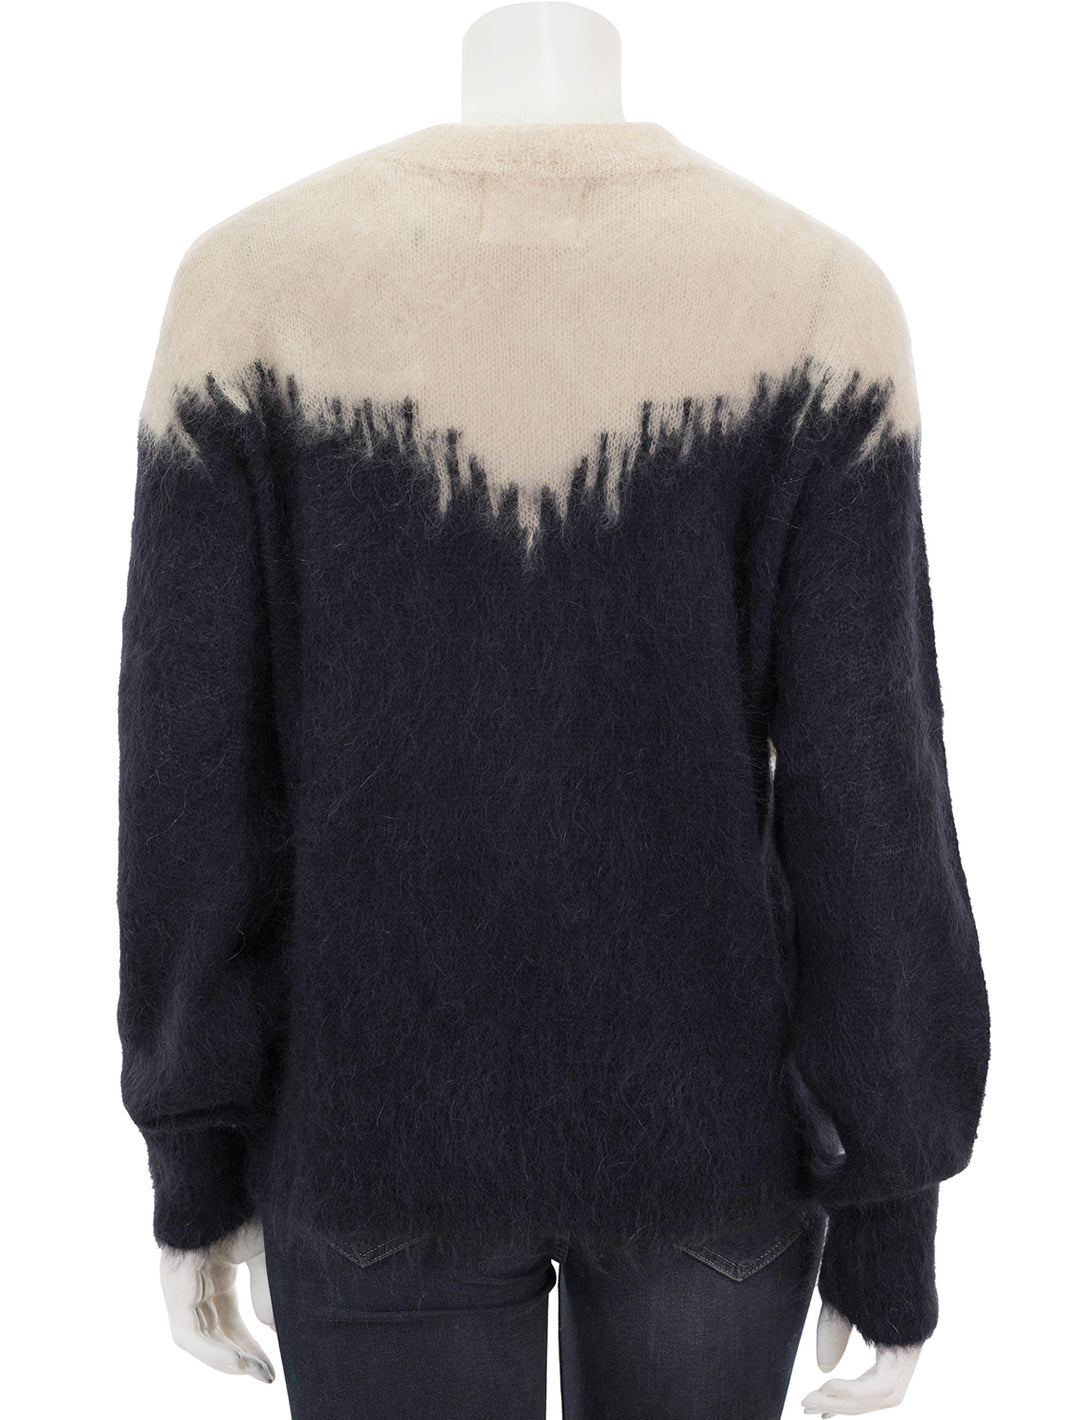 Back view of Isabel Marant Etoile's eleana sweater in faded night.